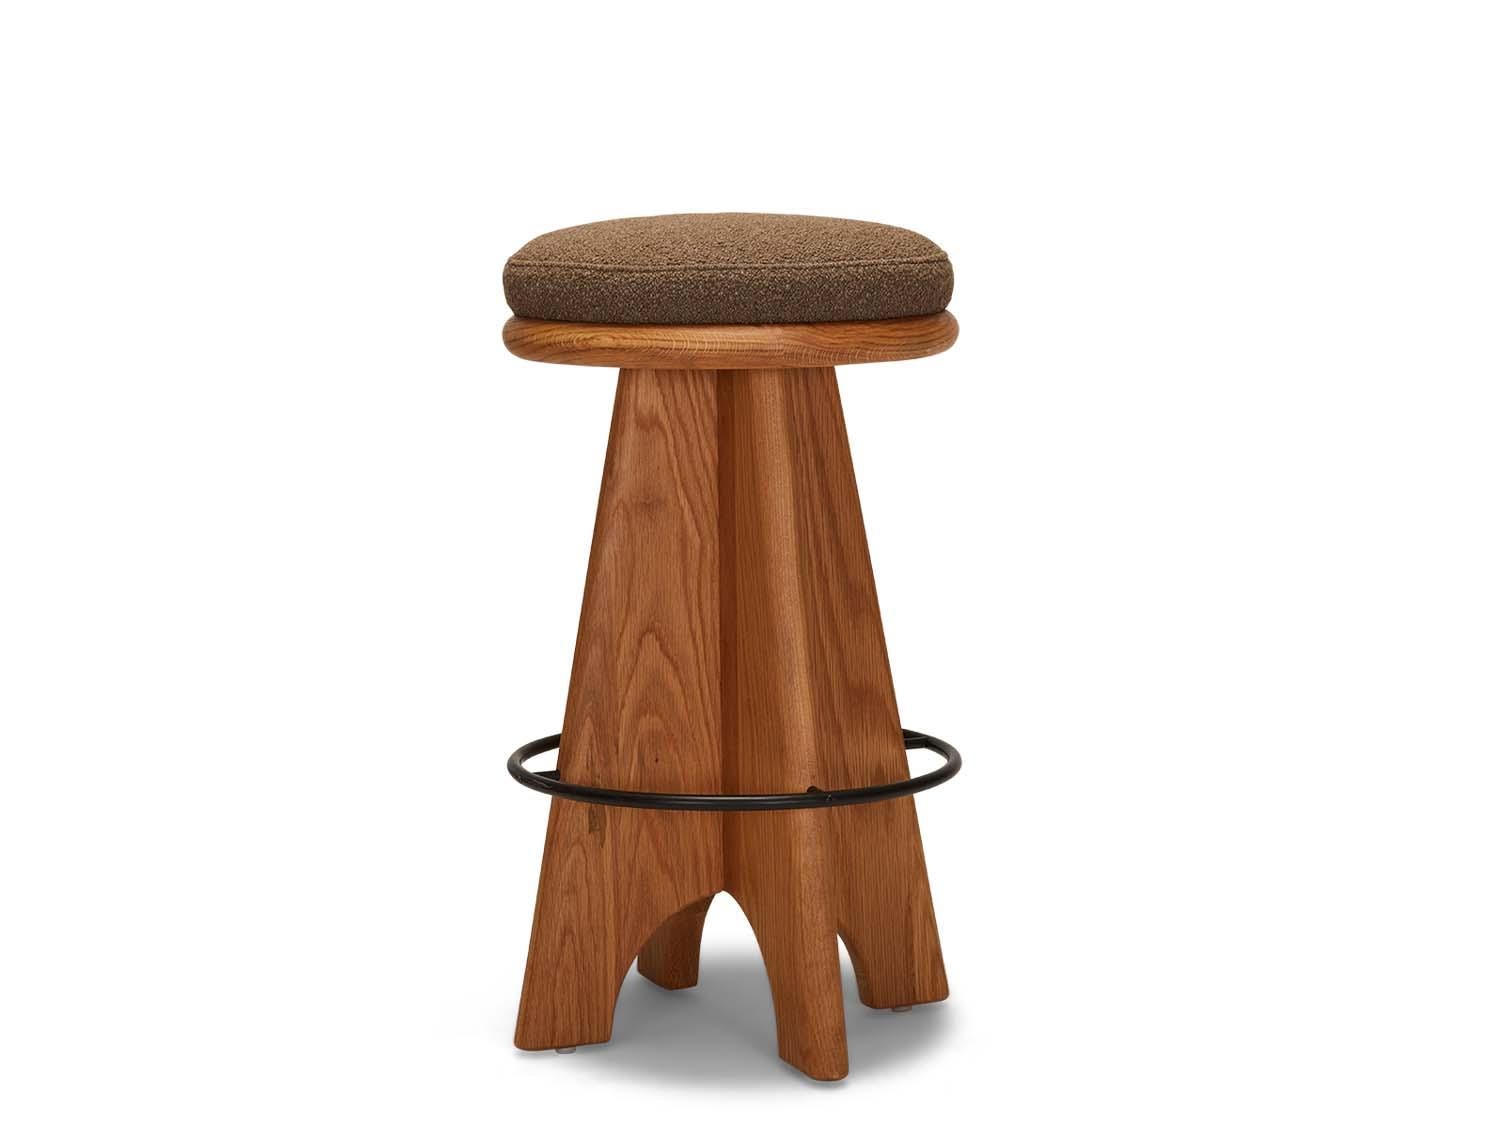 The Ojai barstool features a sculptural wood base, powdercoated metal footrest and an upholstered swivel seat.

The Lawson-Fenning Collection is designed and handmade in Los Angeles, California. Reach out to discover what options are currently in